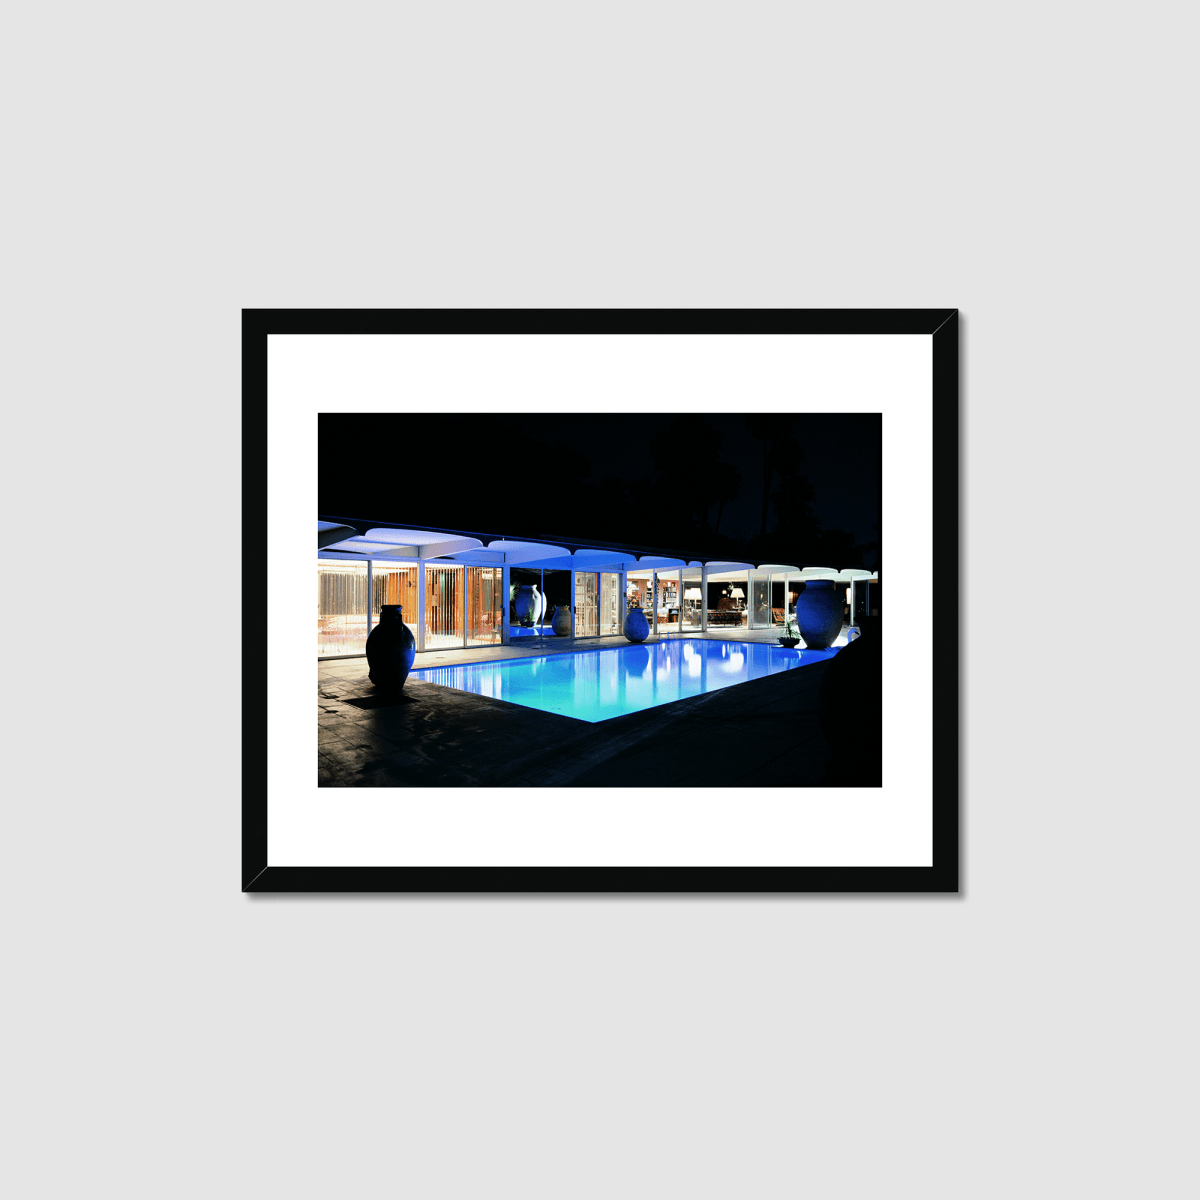 The Burgess Residence at Night Framed Print